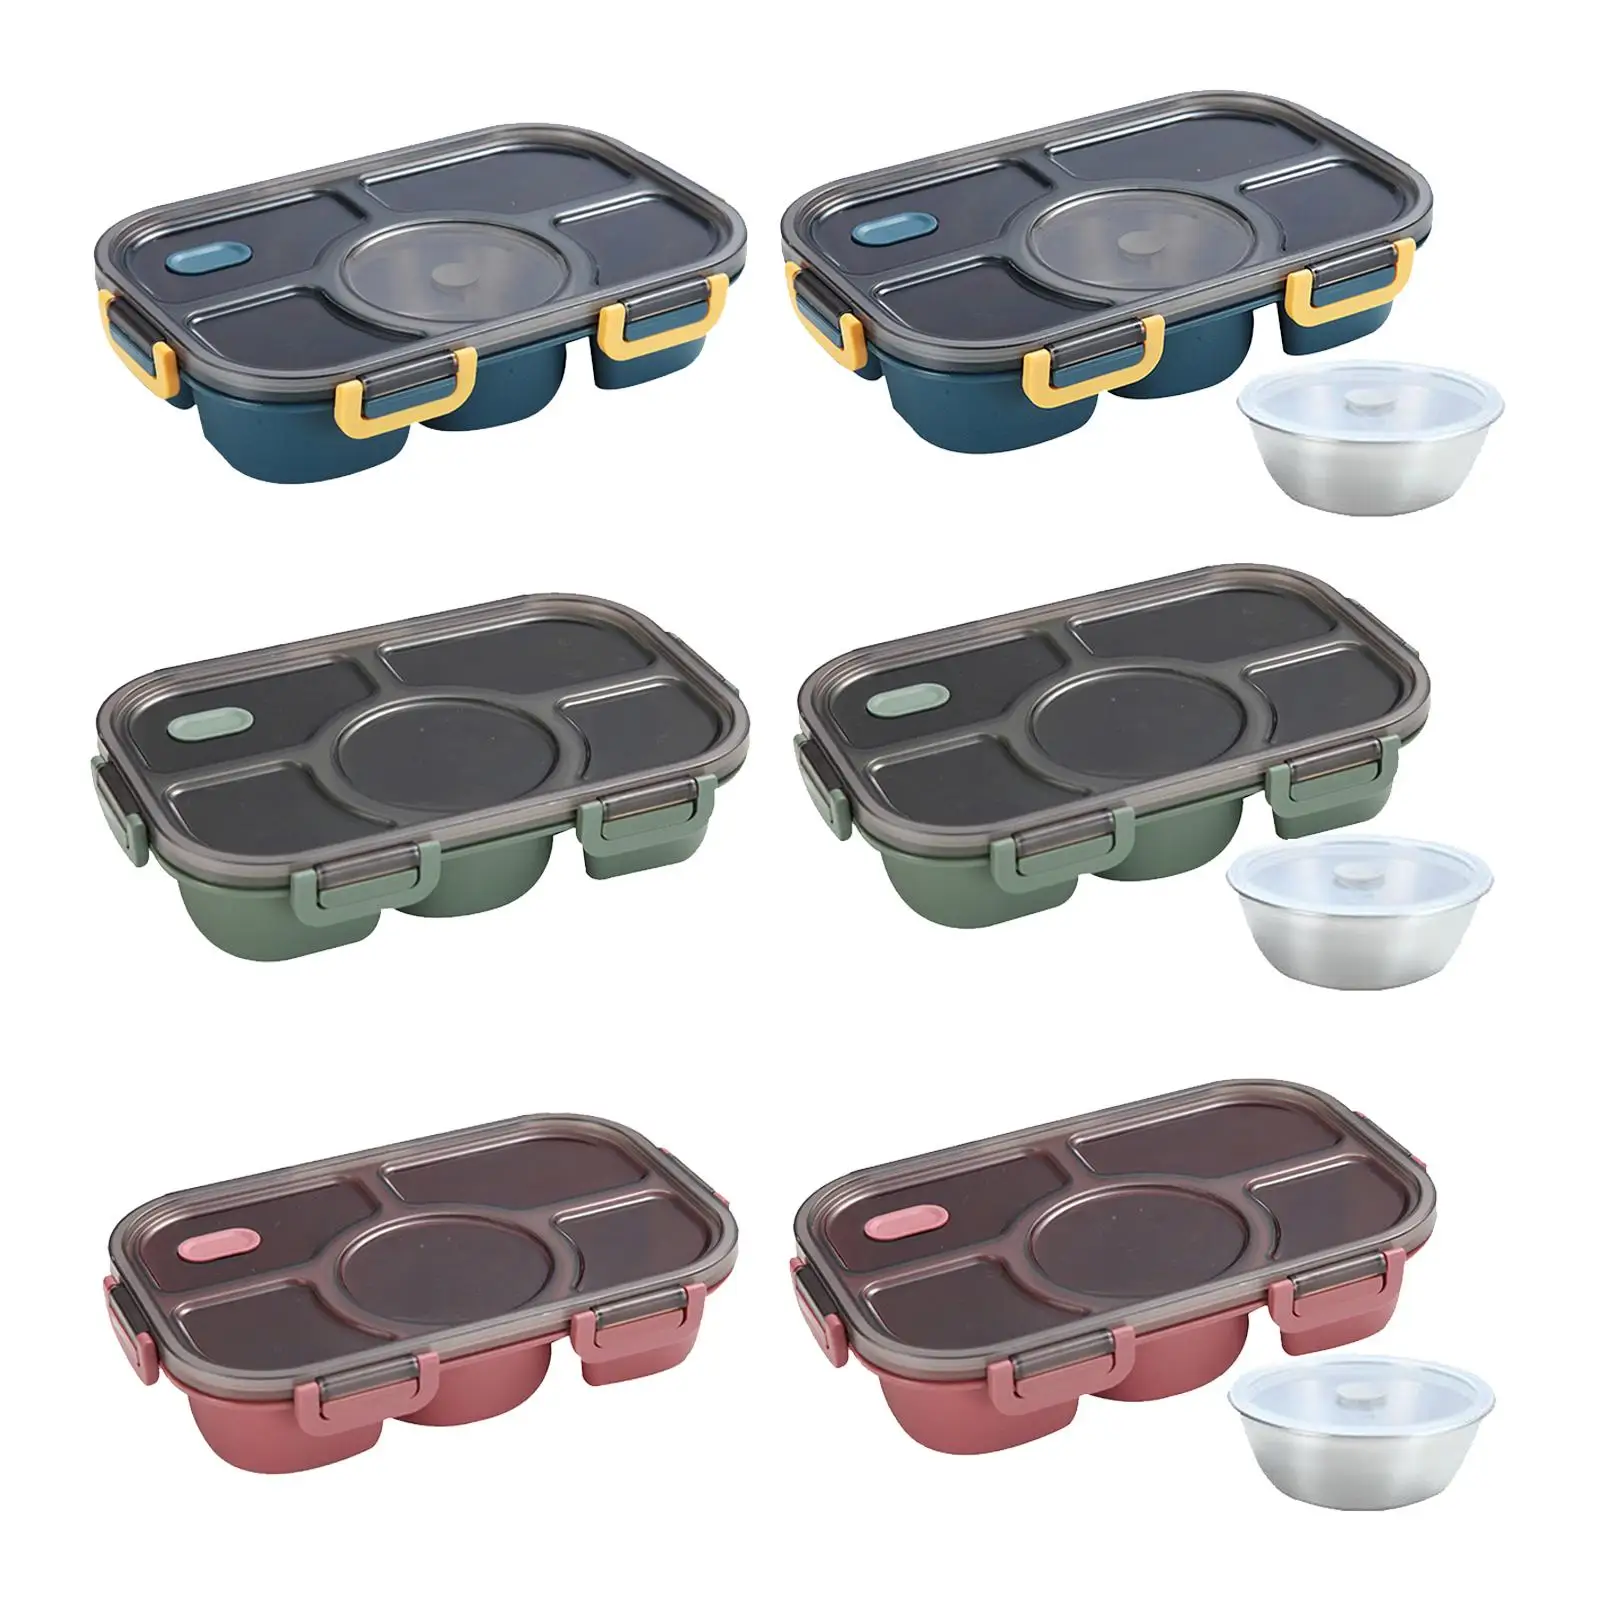 Lunch Box Multifunctional Food Container Lunch Container for Picnic Hiking Office